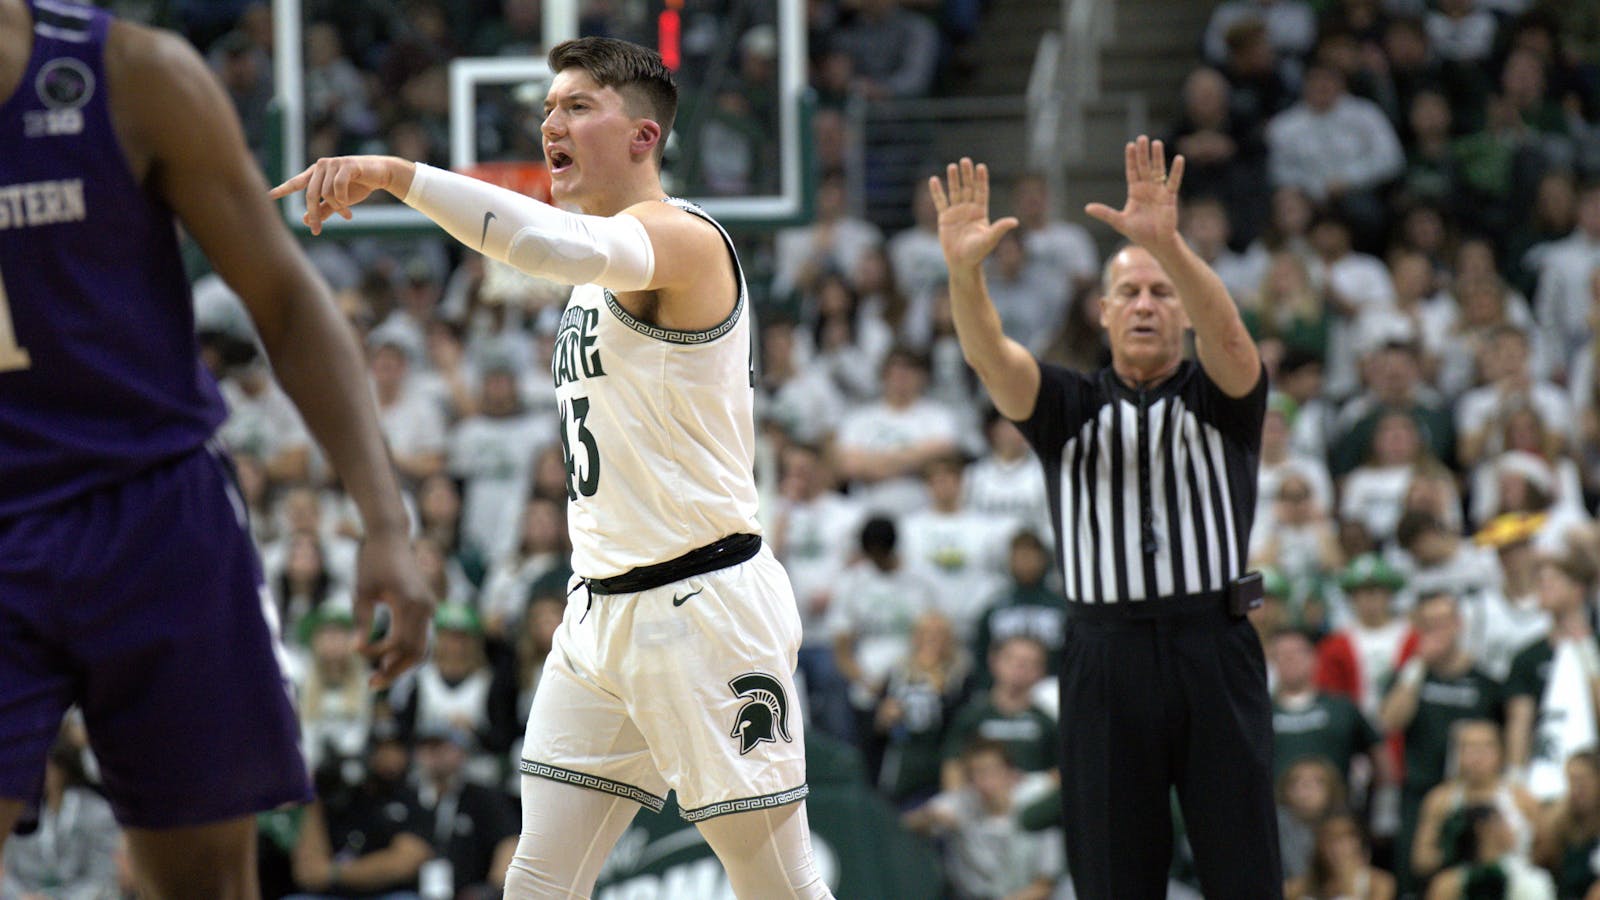 FINAL: Northwestern knocks off Michigan State in conference opener, 70-63